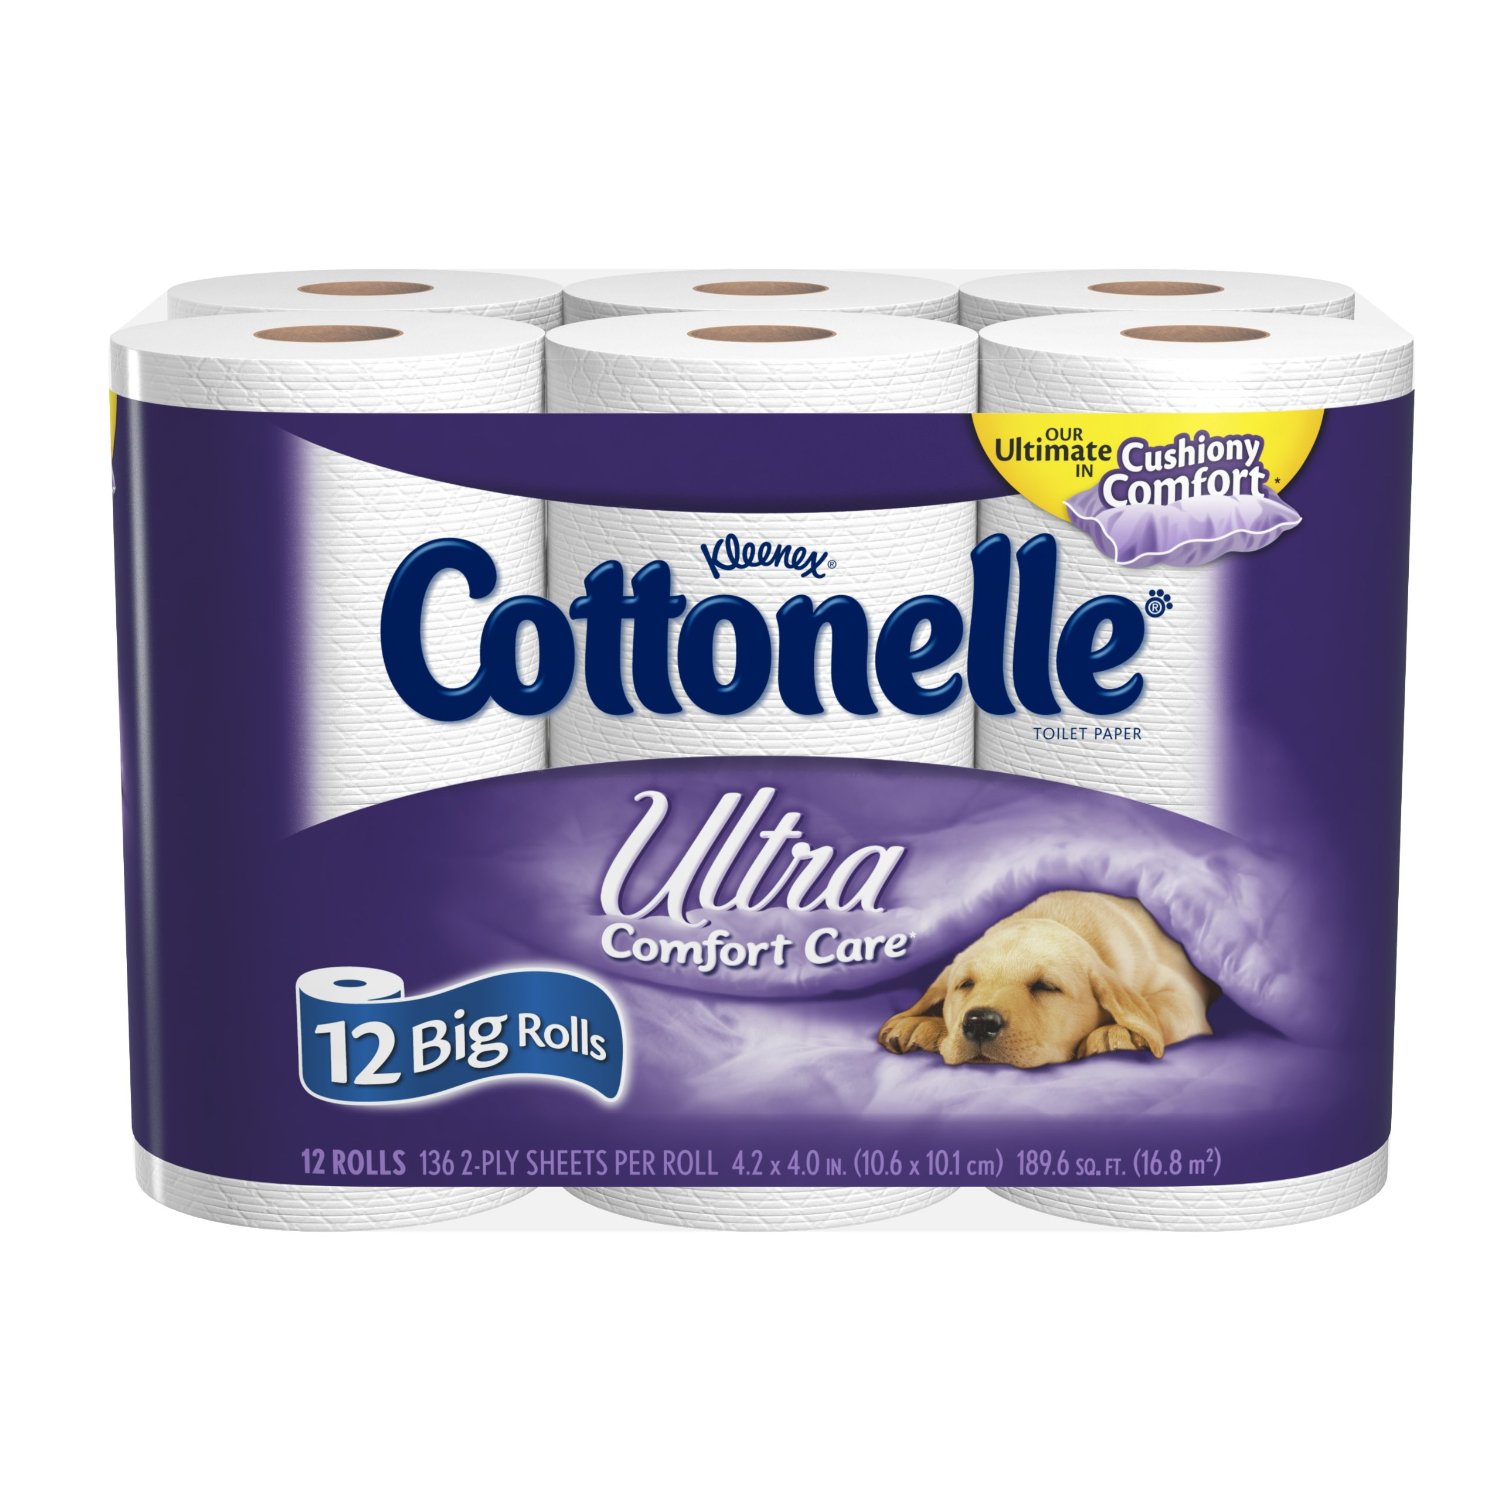 free-cottonelle-ultra-comfort-care-12-roll-pack-kmart-acadiana-s